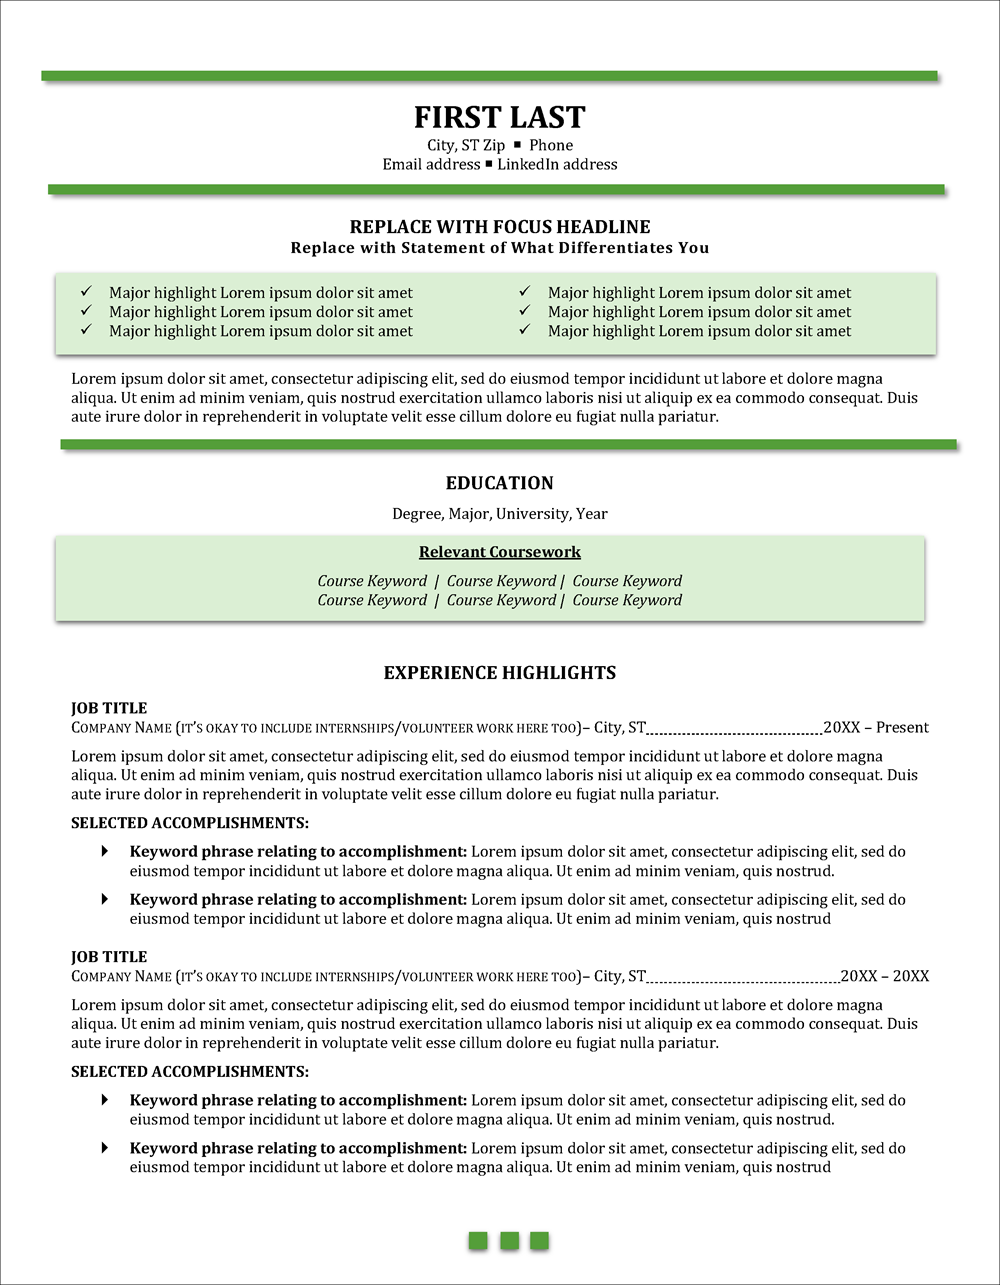 Resume template for entry-level workers